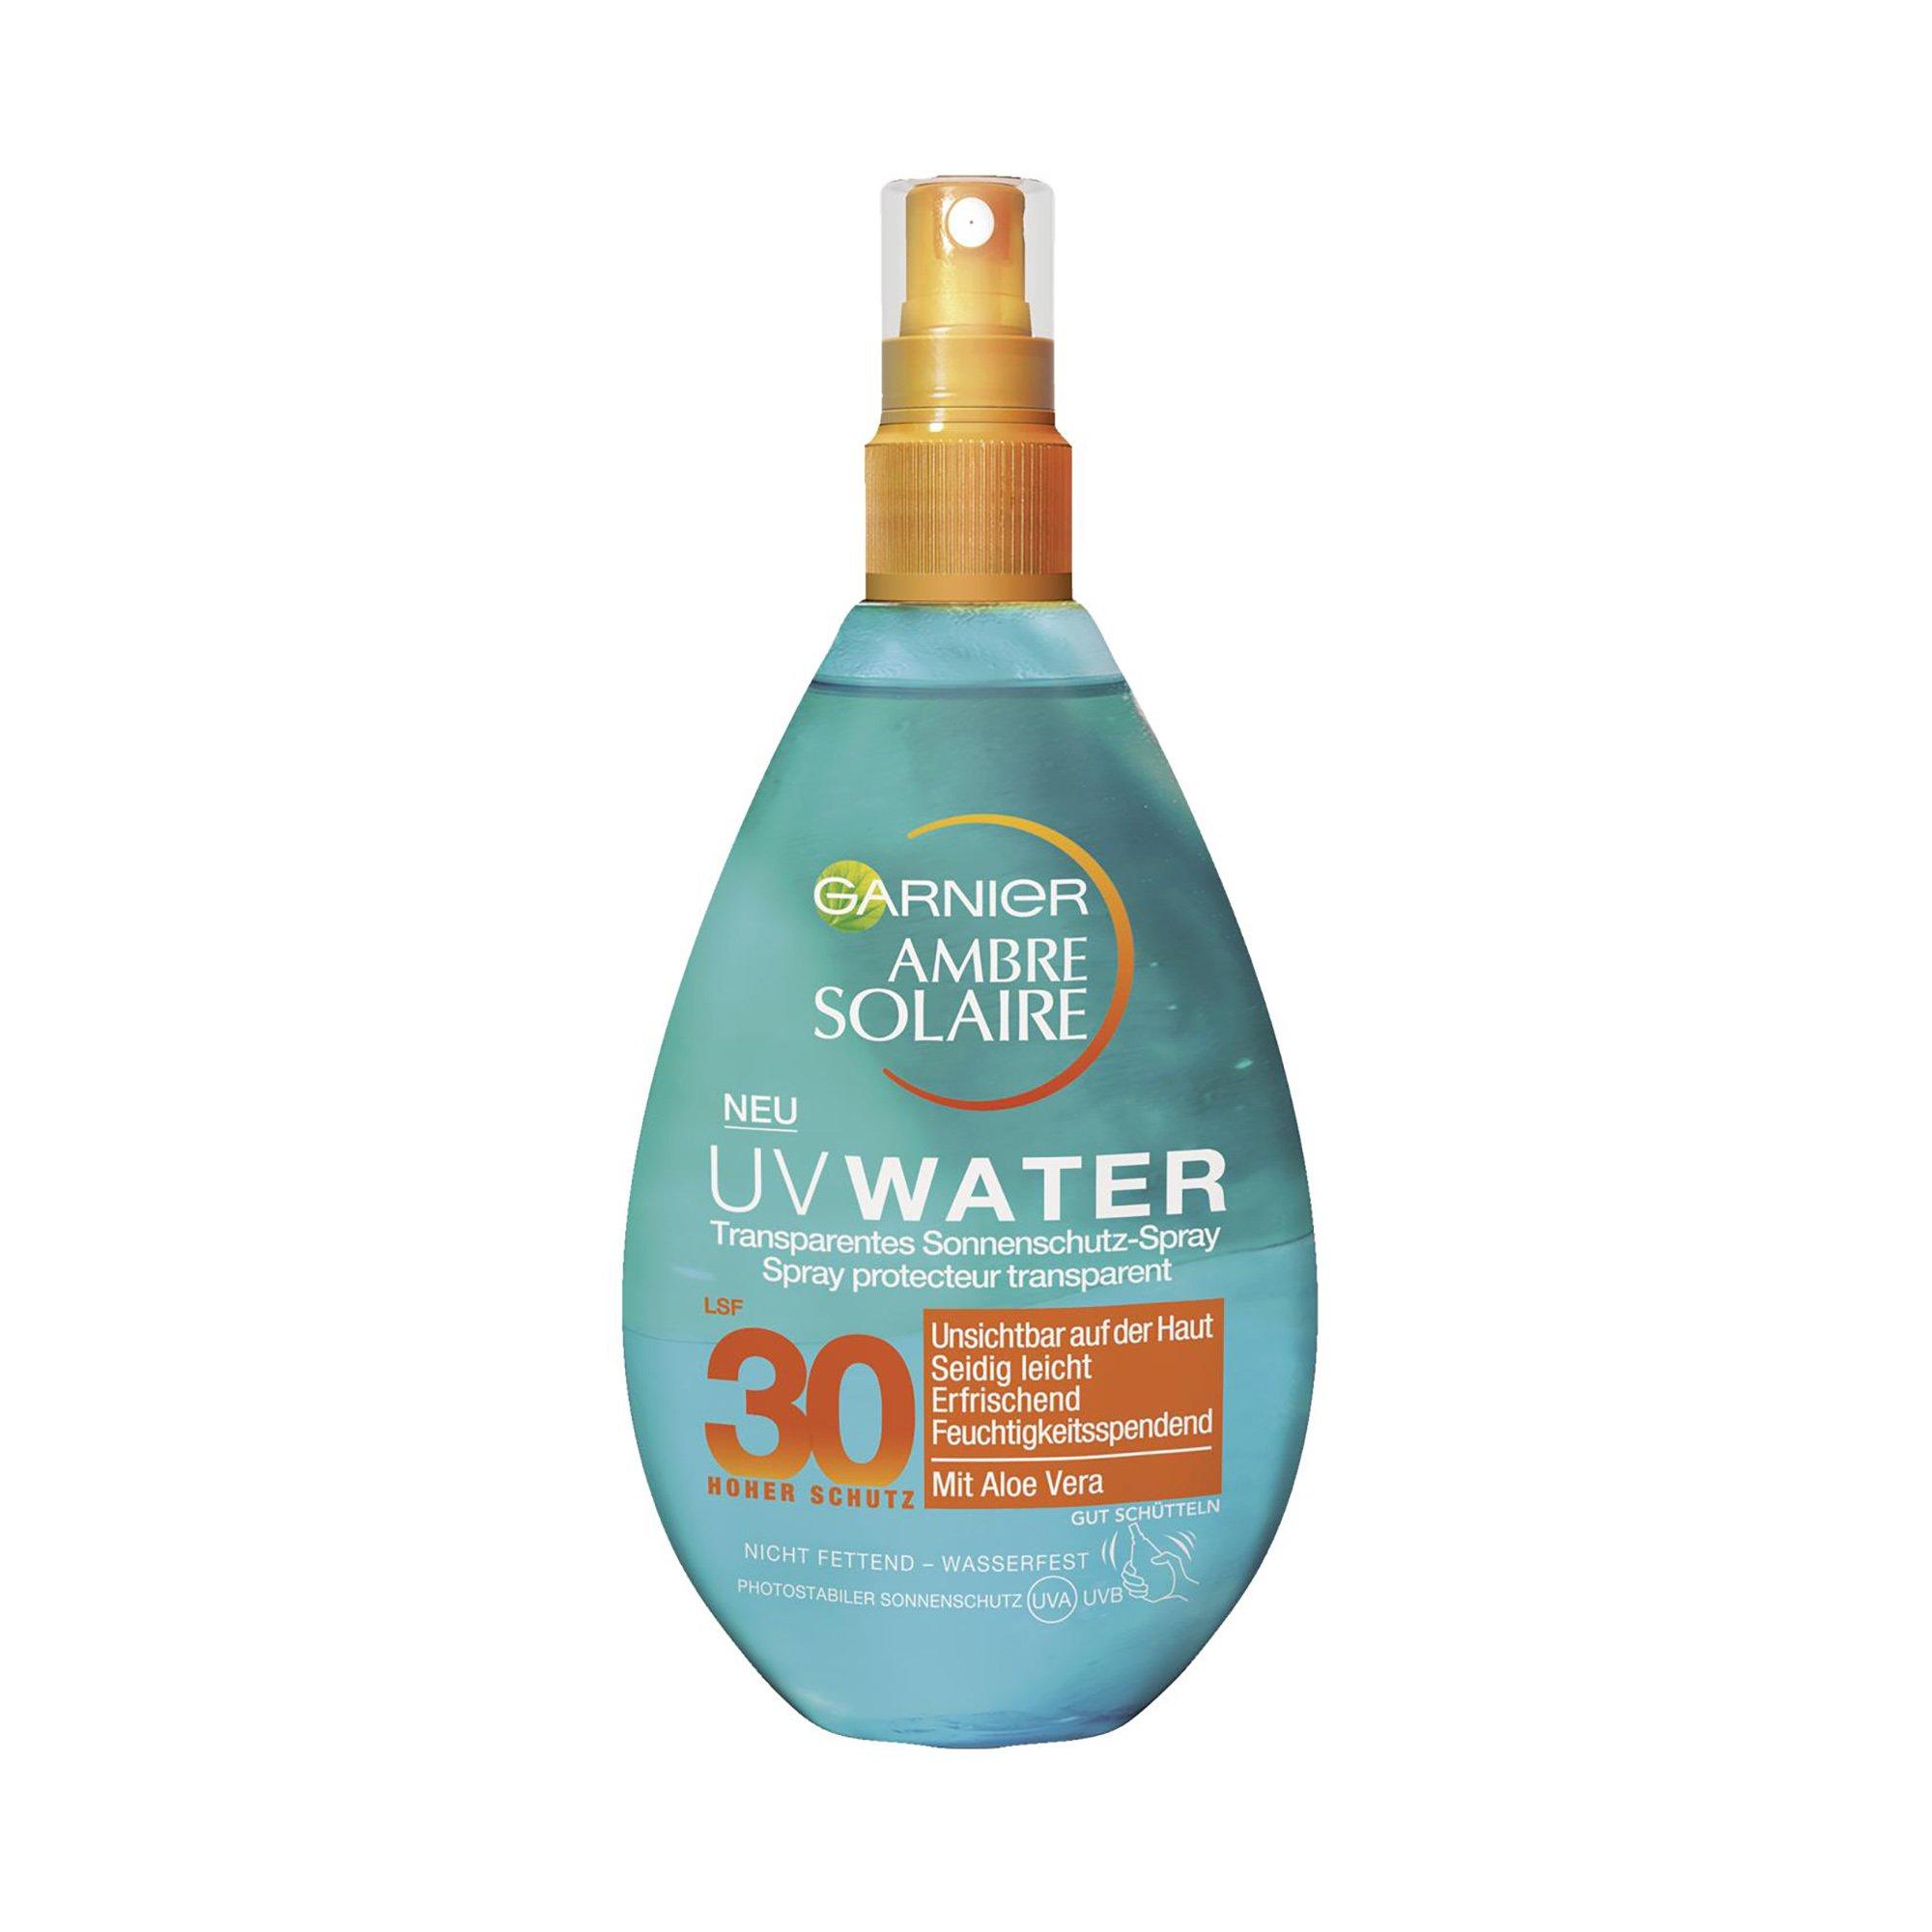 Image of AMBRE SOLAIRE Solarwater UV Water Transparentes Sonnenschutz-Spray LSF 30 - 150 ml